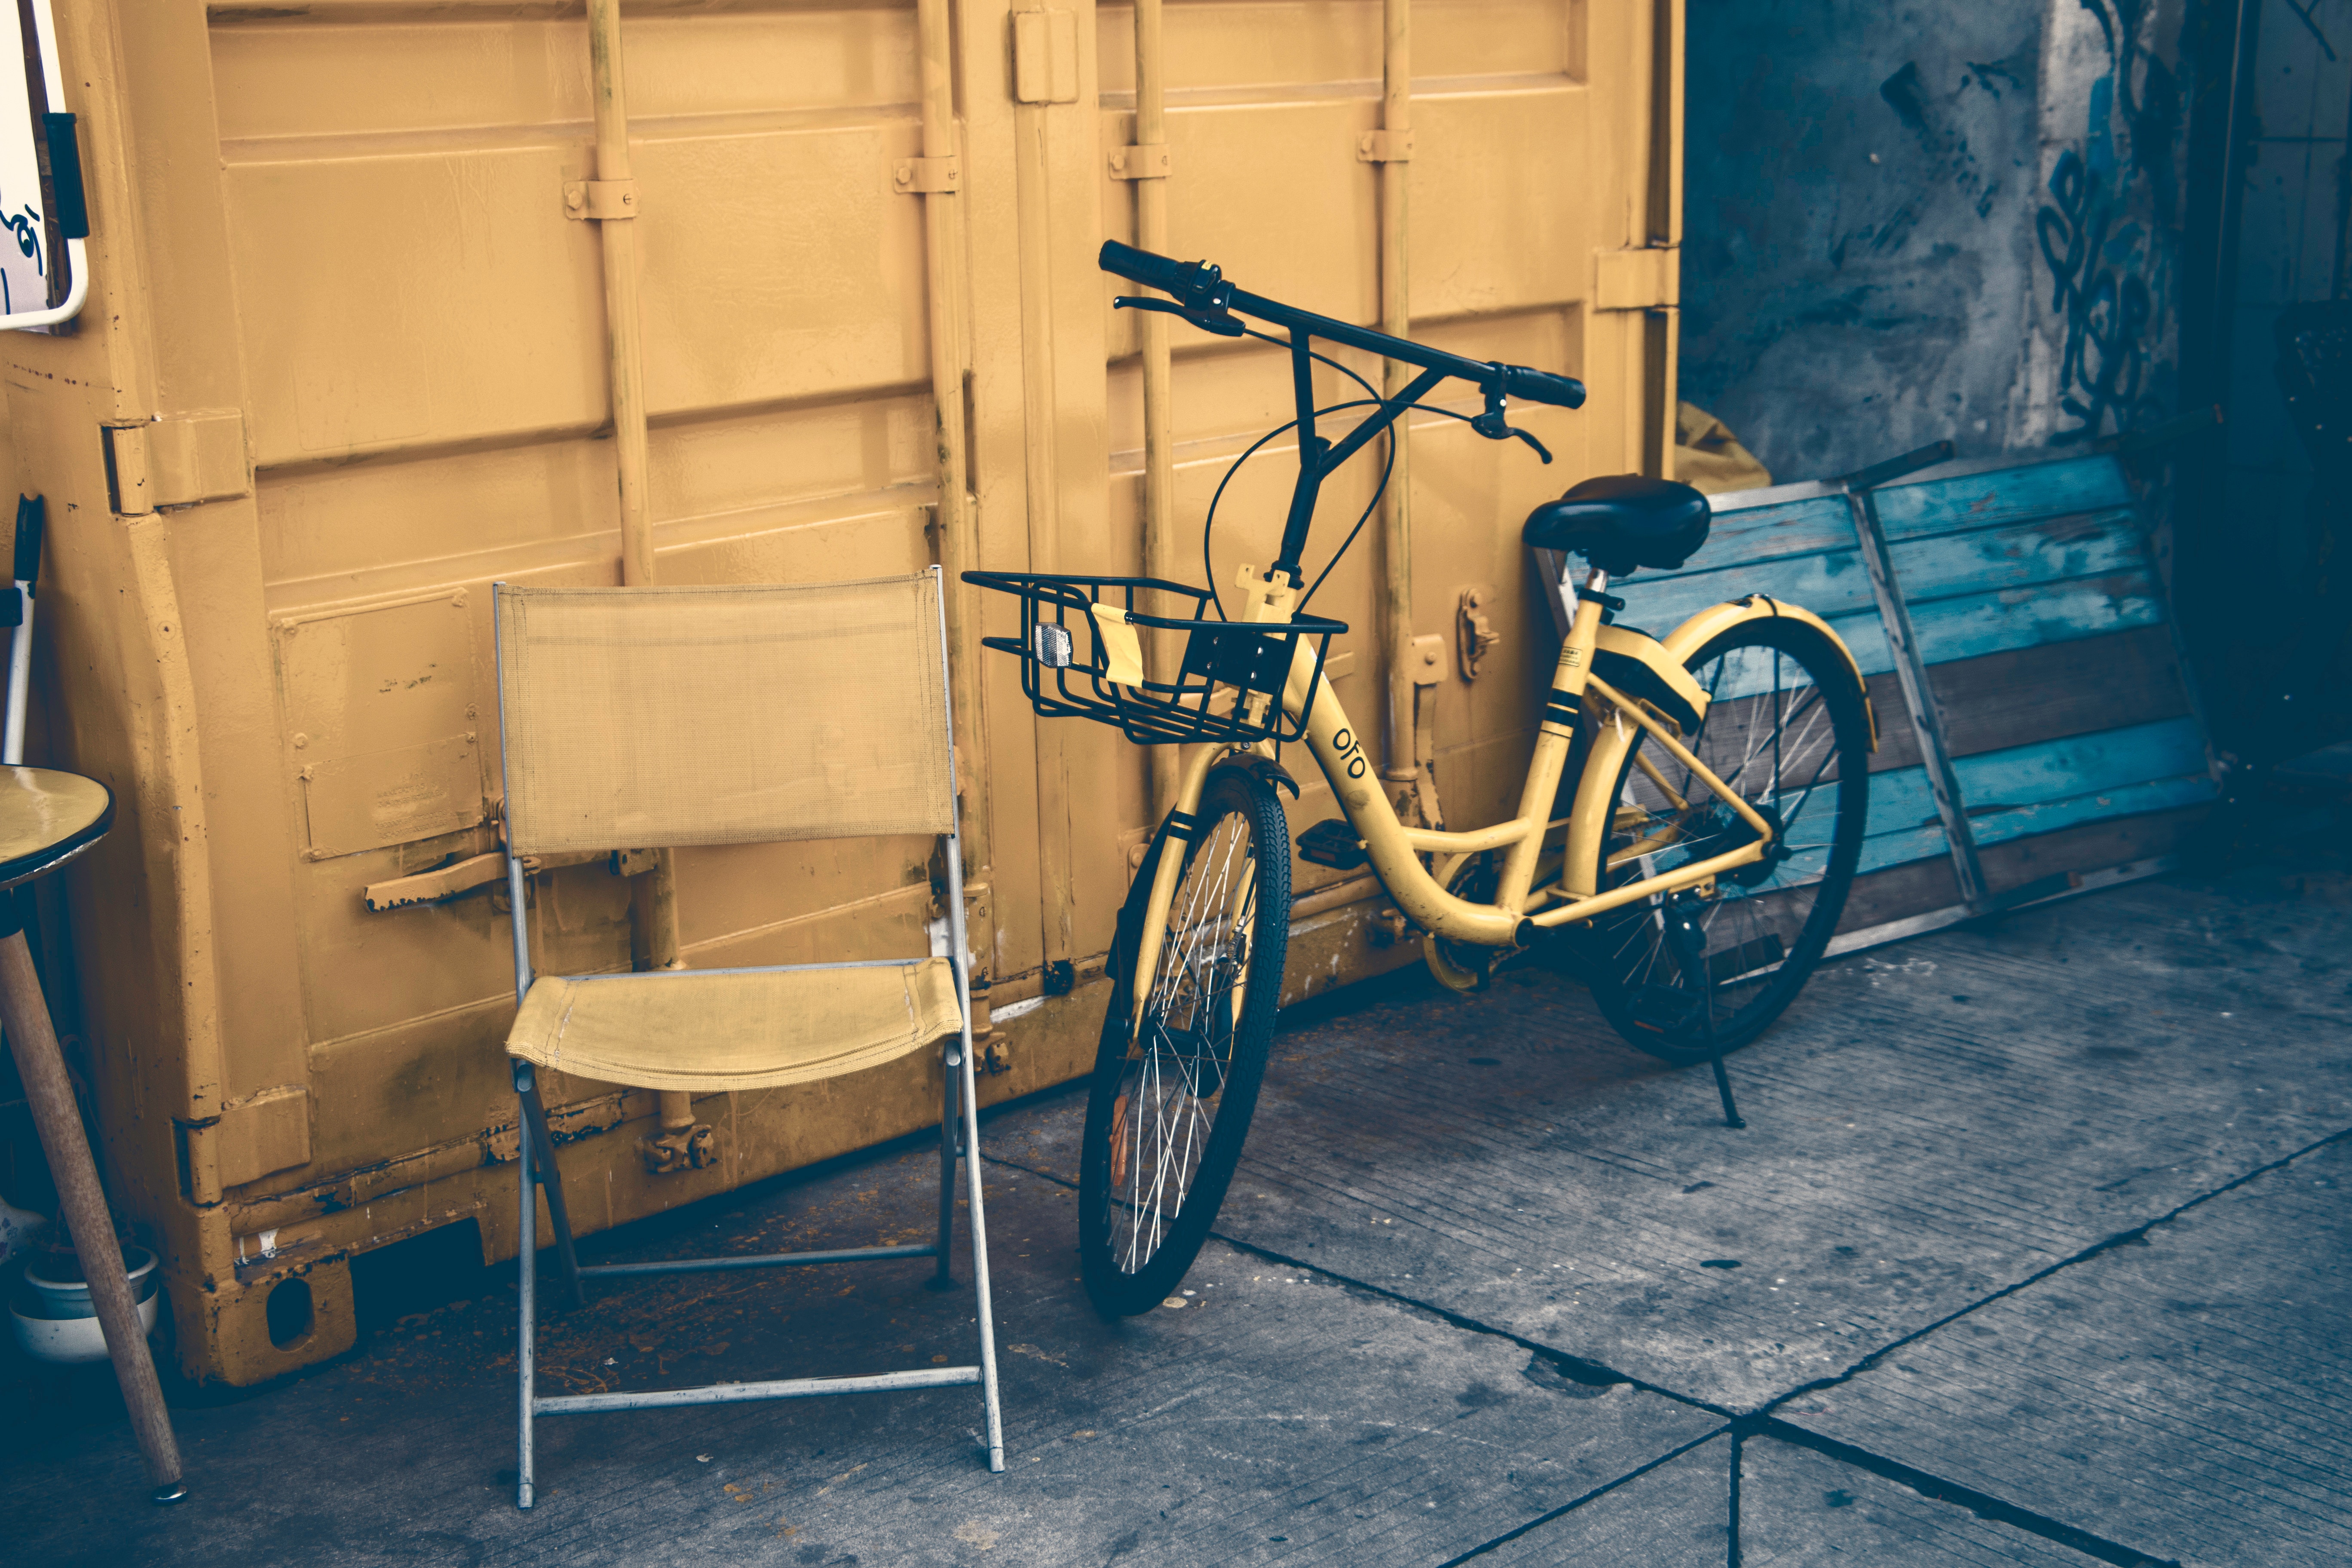 150431 download wallpaper yellow, miscellanea, miscellaneous, door, bicycle screensavers and pictures for free